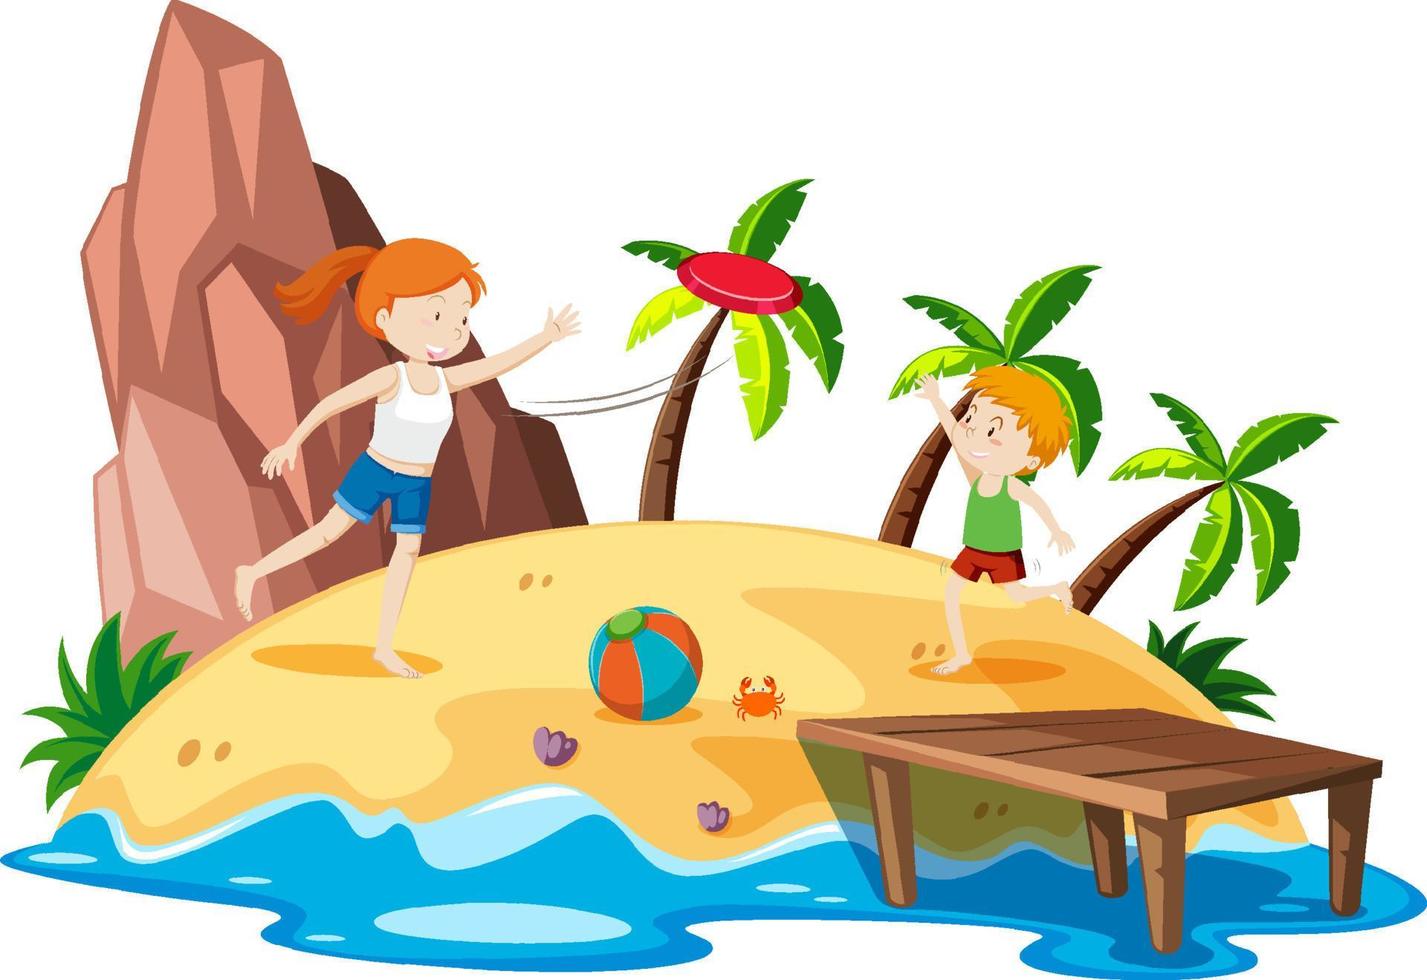 Tropical island with people on vacation vector